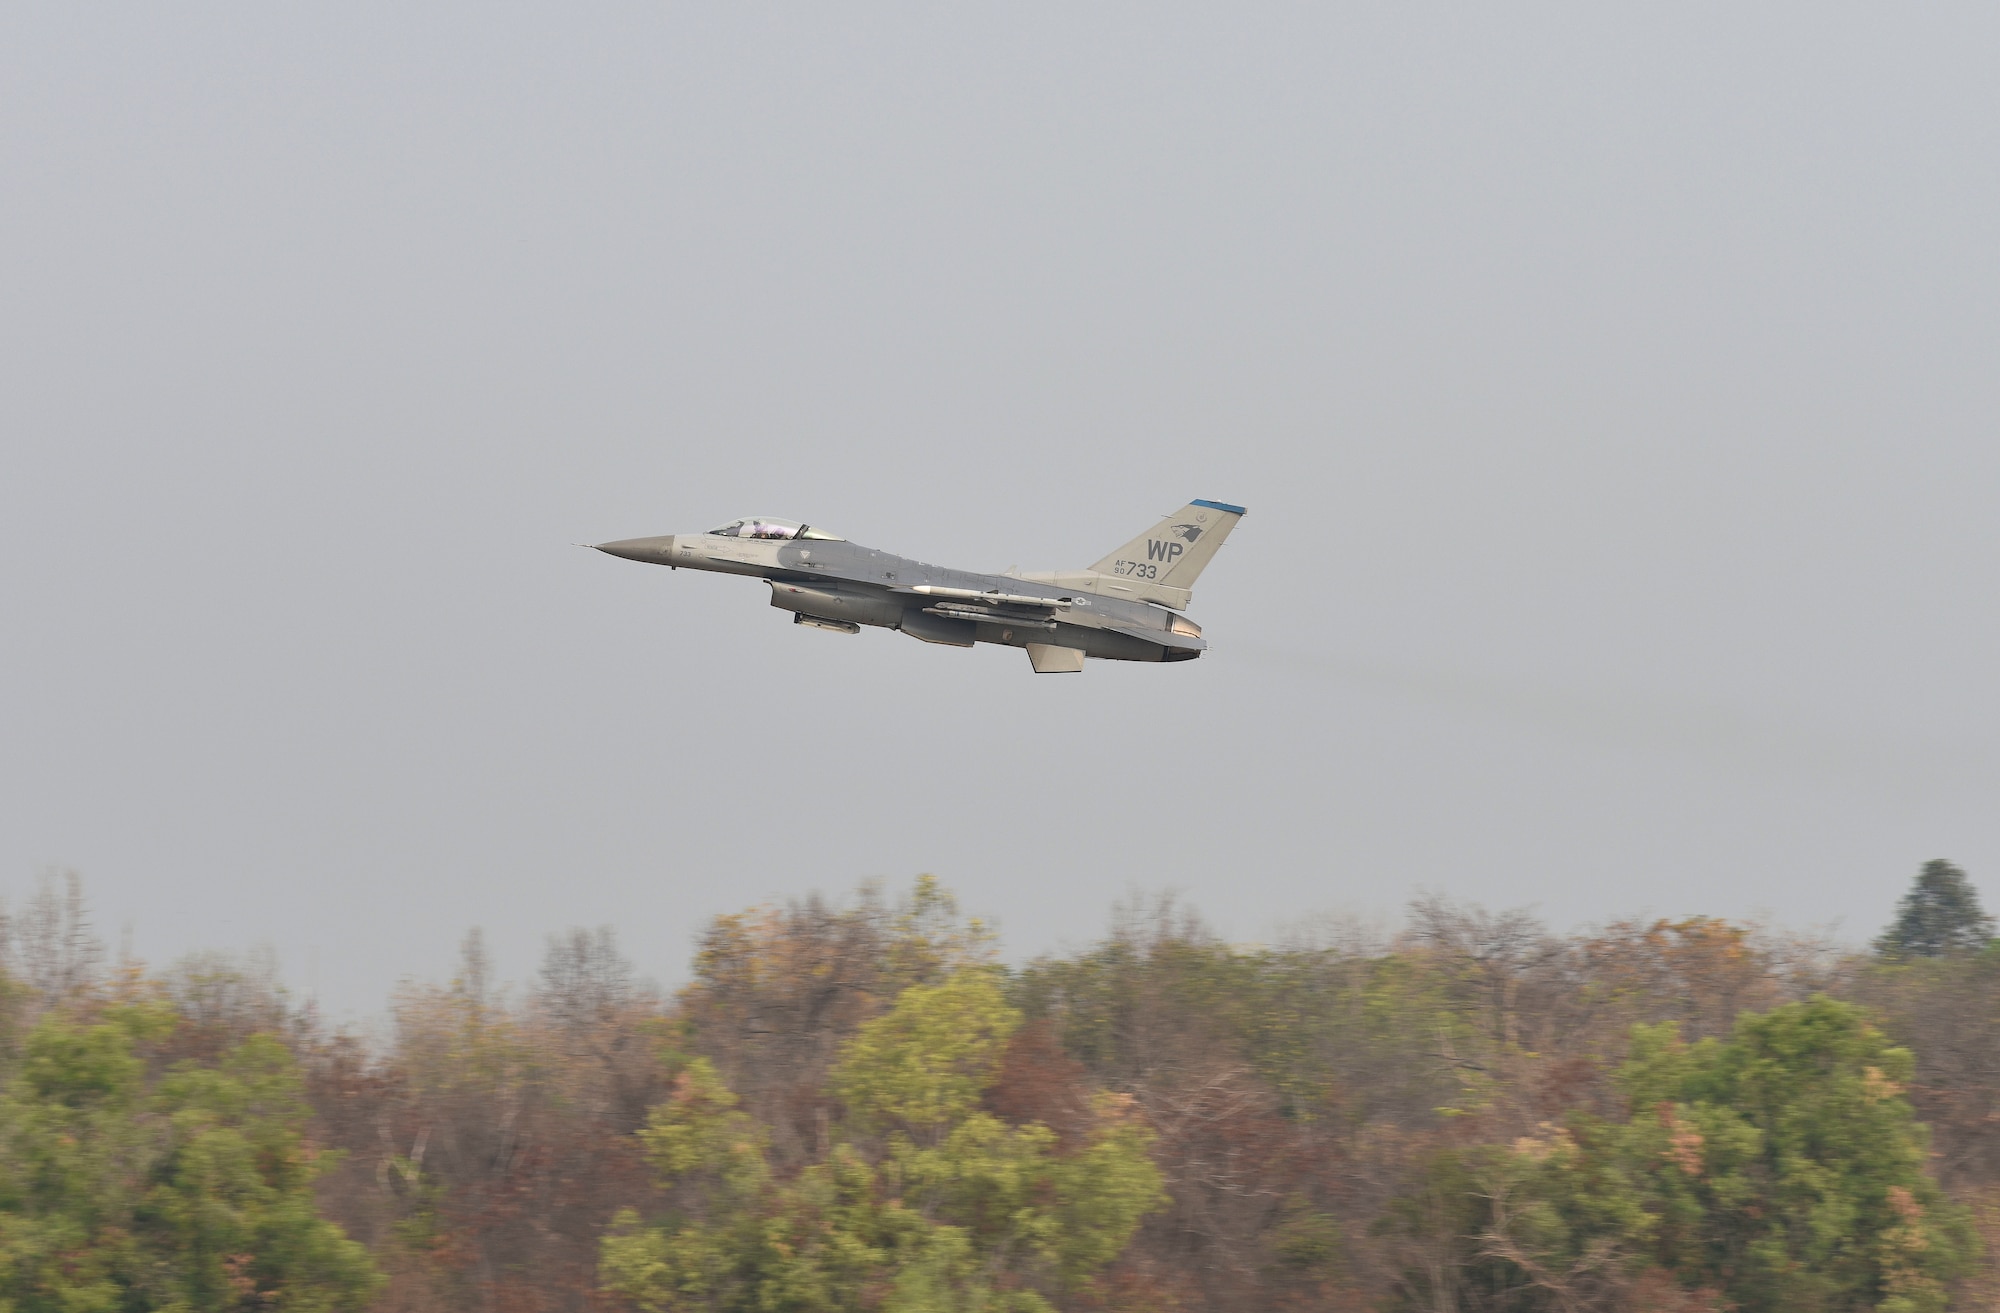 A U.S. Air Force F-16 Fighting Falcon takes off prior to Exercise Cobra Gold 2019 at Korat Royal Thai Air Force Base, Thailand, Feb. 11, 2019. Cobra Gold is the largest Theater Security Cooperation exercise in the Indo-Asia-Pacific region and is an integral part of the U.S. commitment to strengthen engagement in the region. (U.S. Air Force photo by Senior Airman Savannah L. Waters)